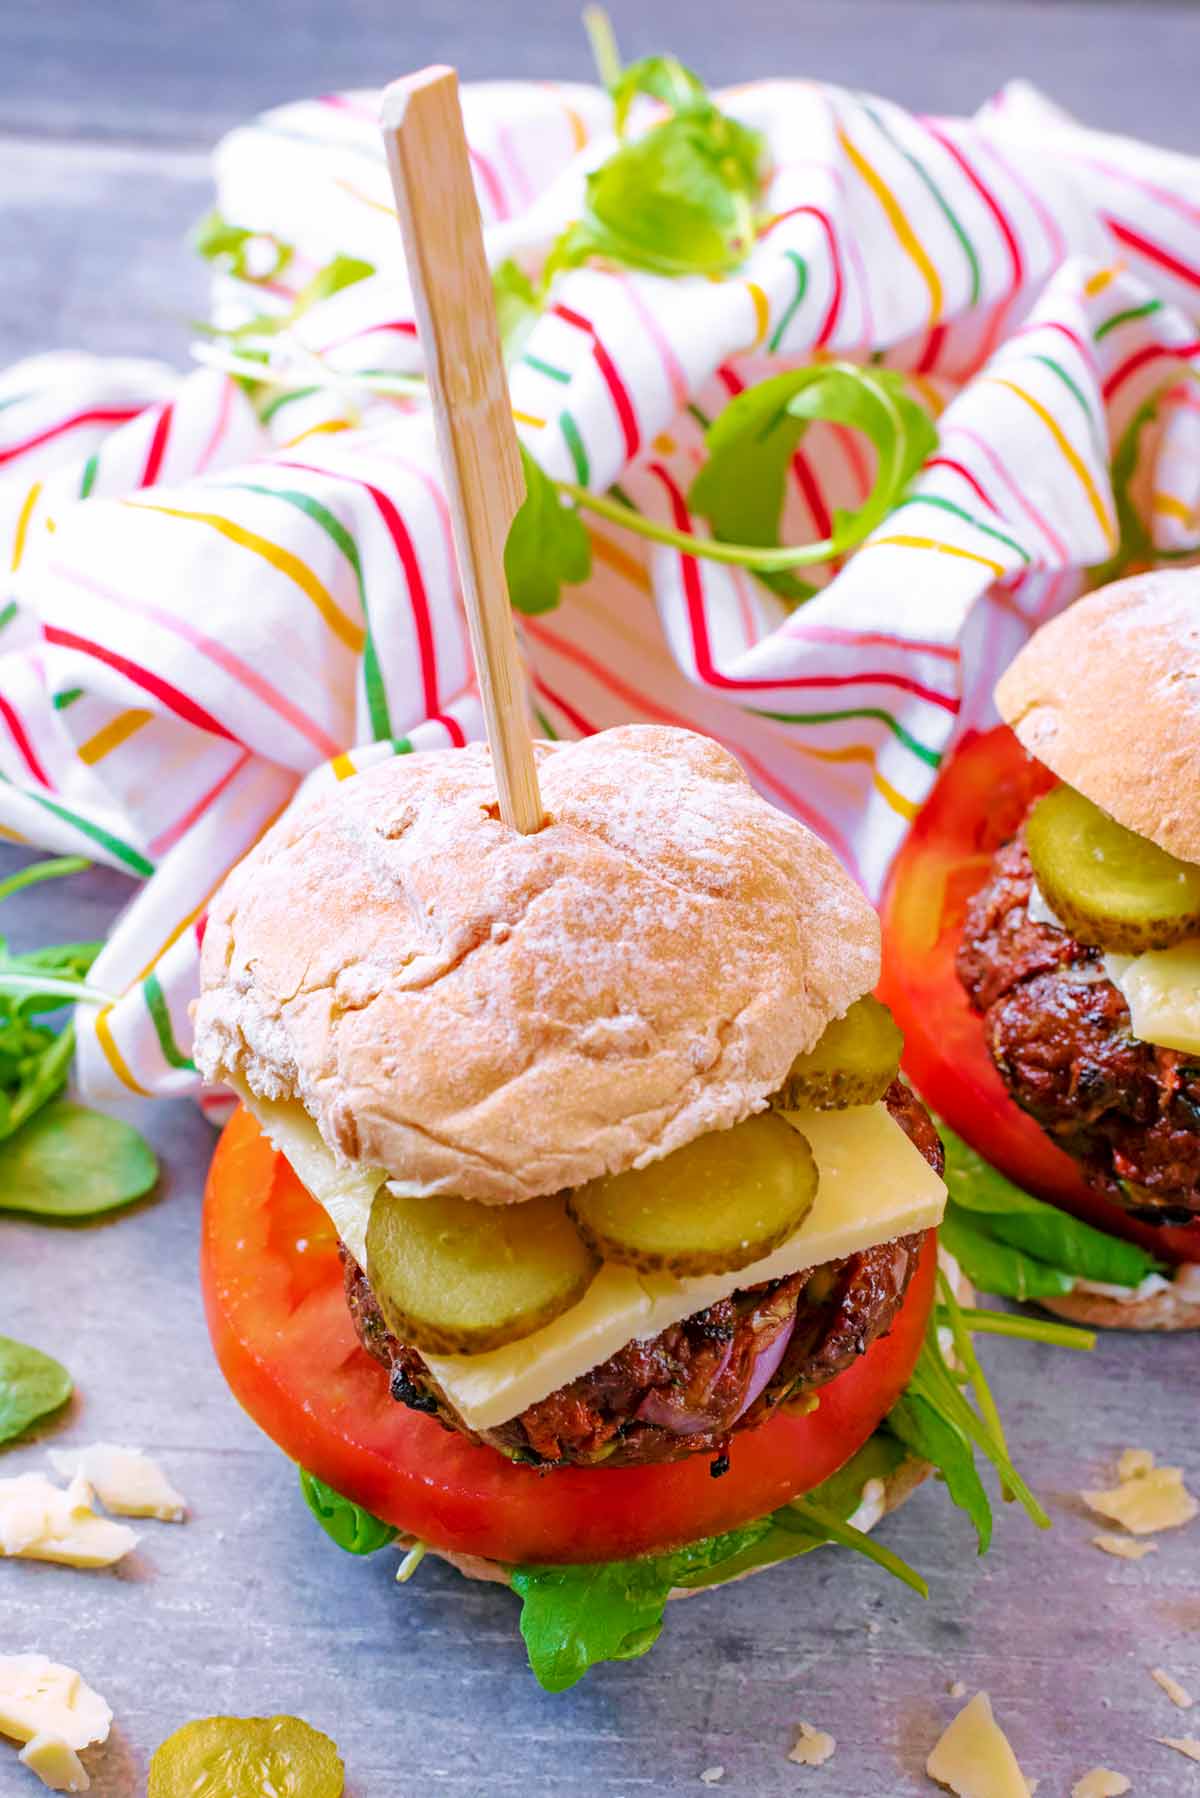 A beef burger in a bun with salad, cheese and pickles. A small wooden skewer is pushed through the whole burger.